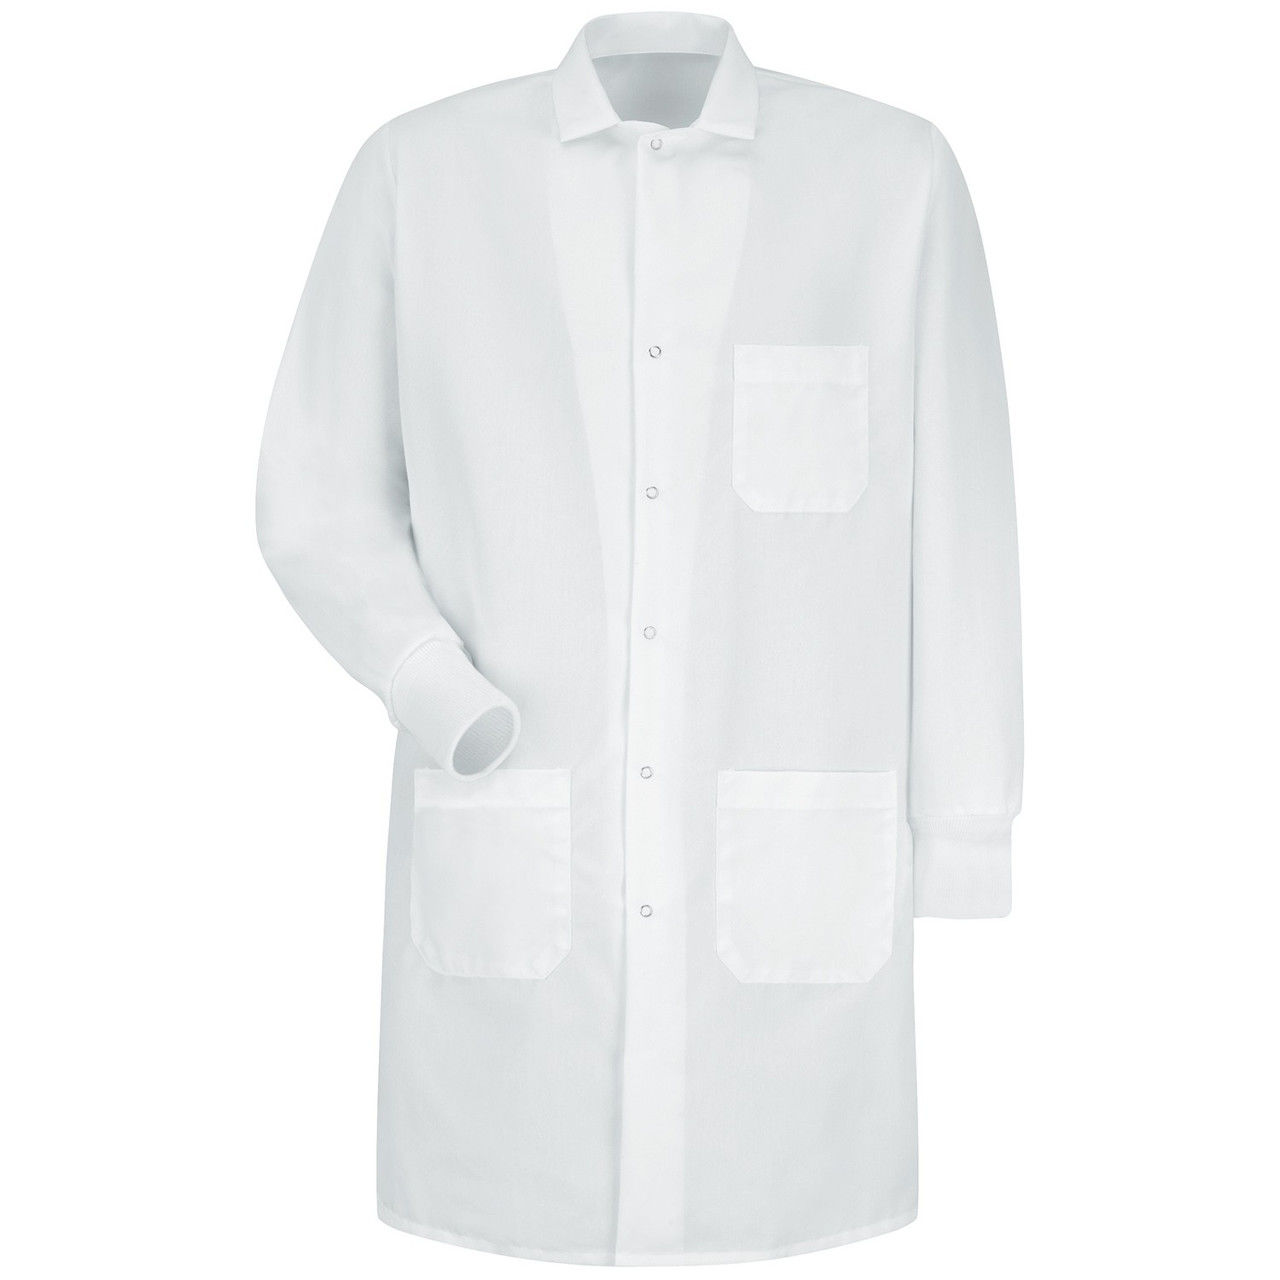 How do I know if my lab coat fits?